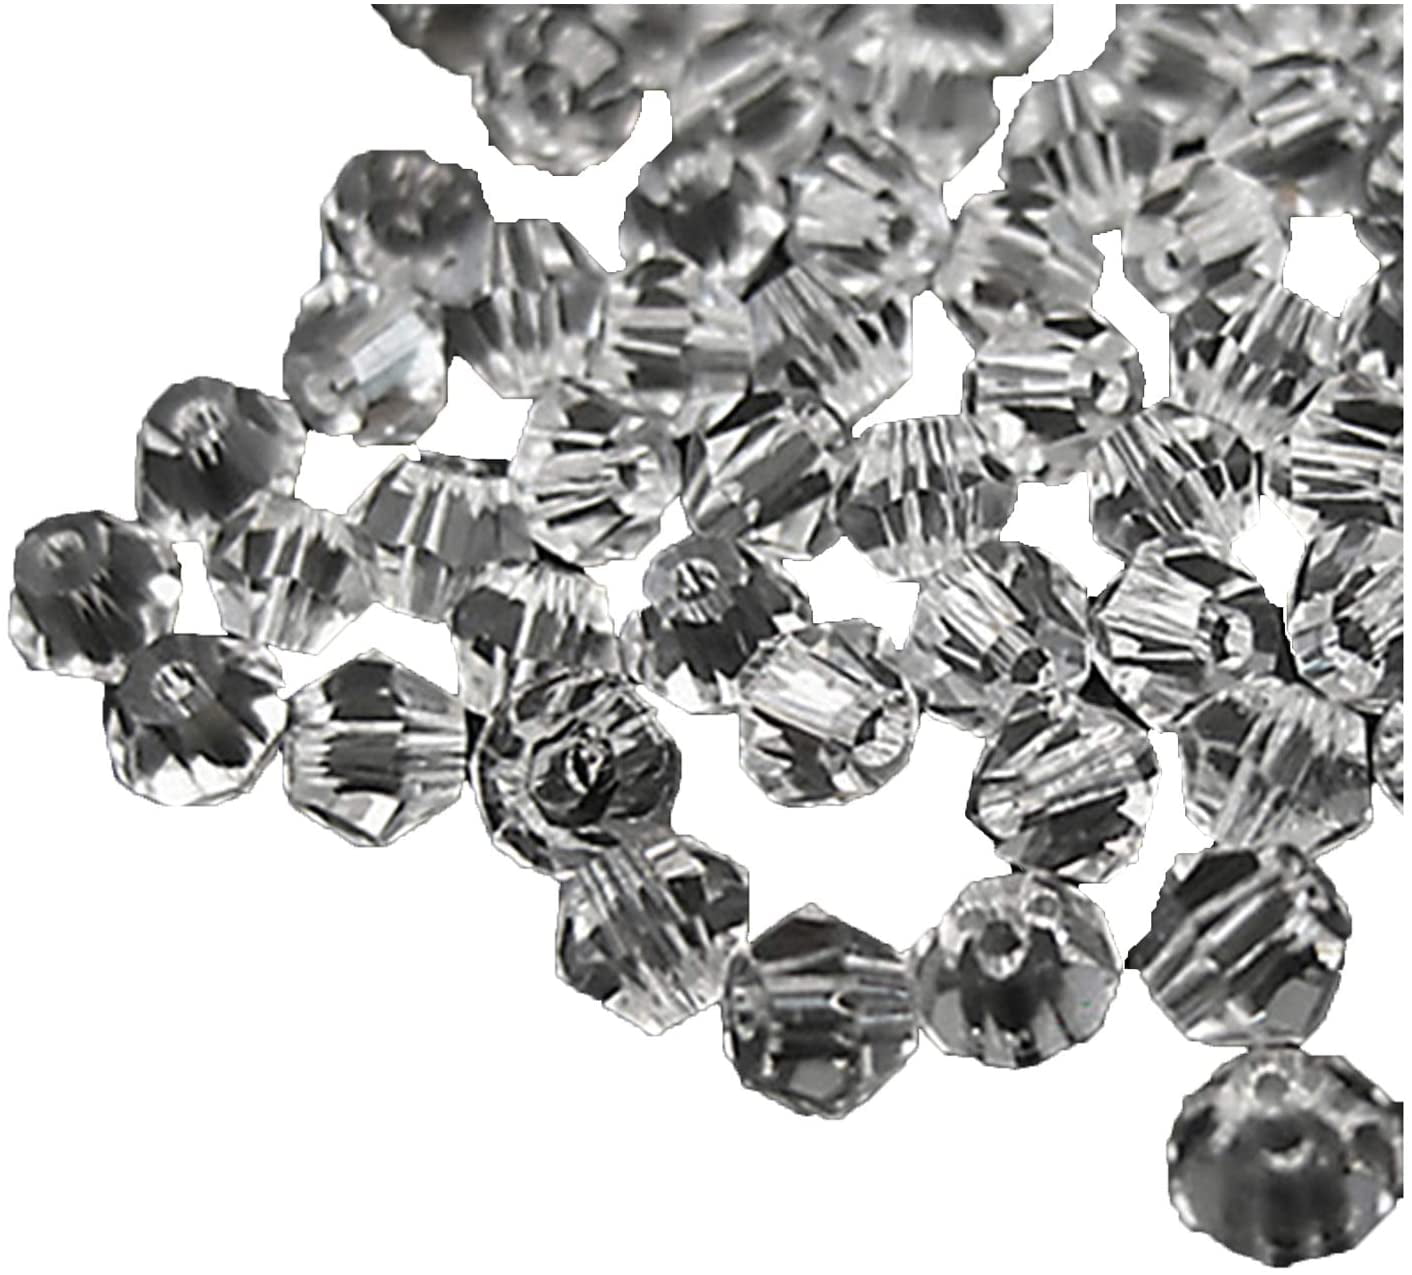 Lot 100x Round Acrylic Cat's eye Opal Spacer Loose Beads For Jewelry Making 8mm